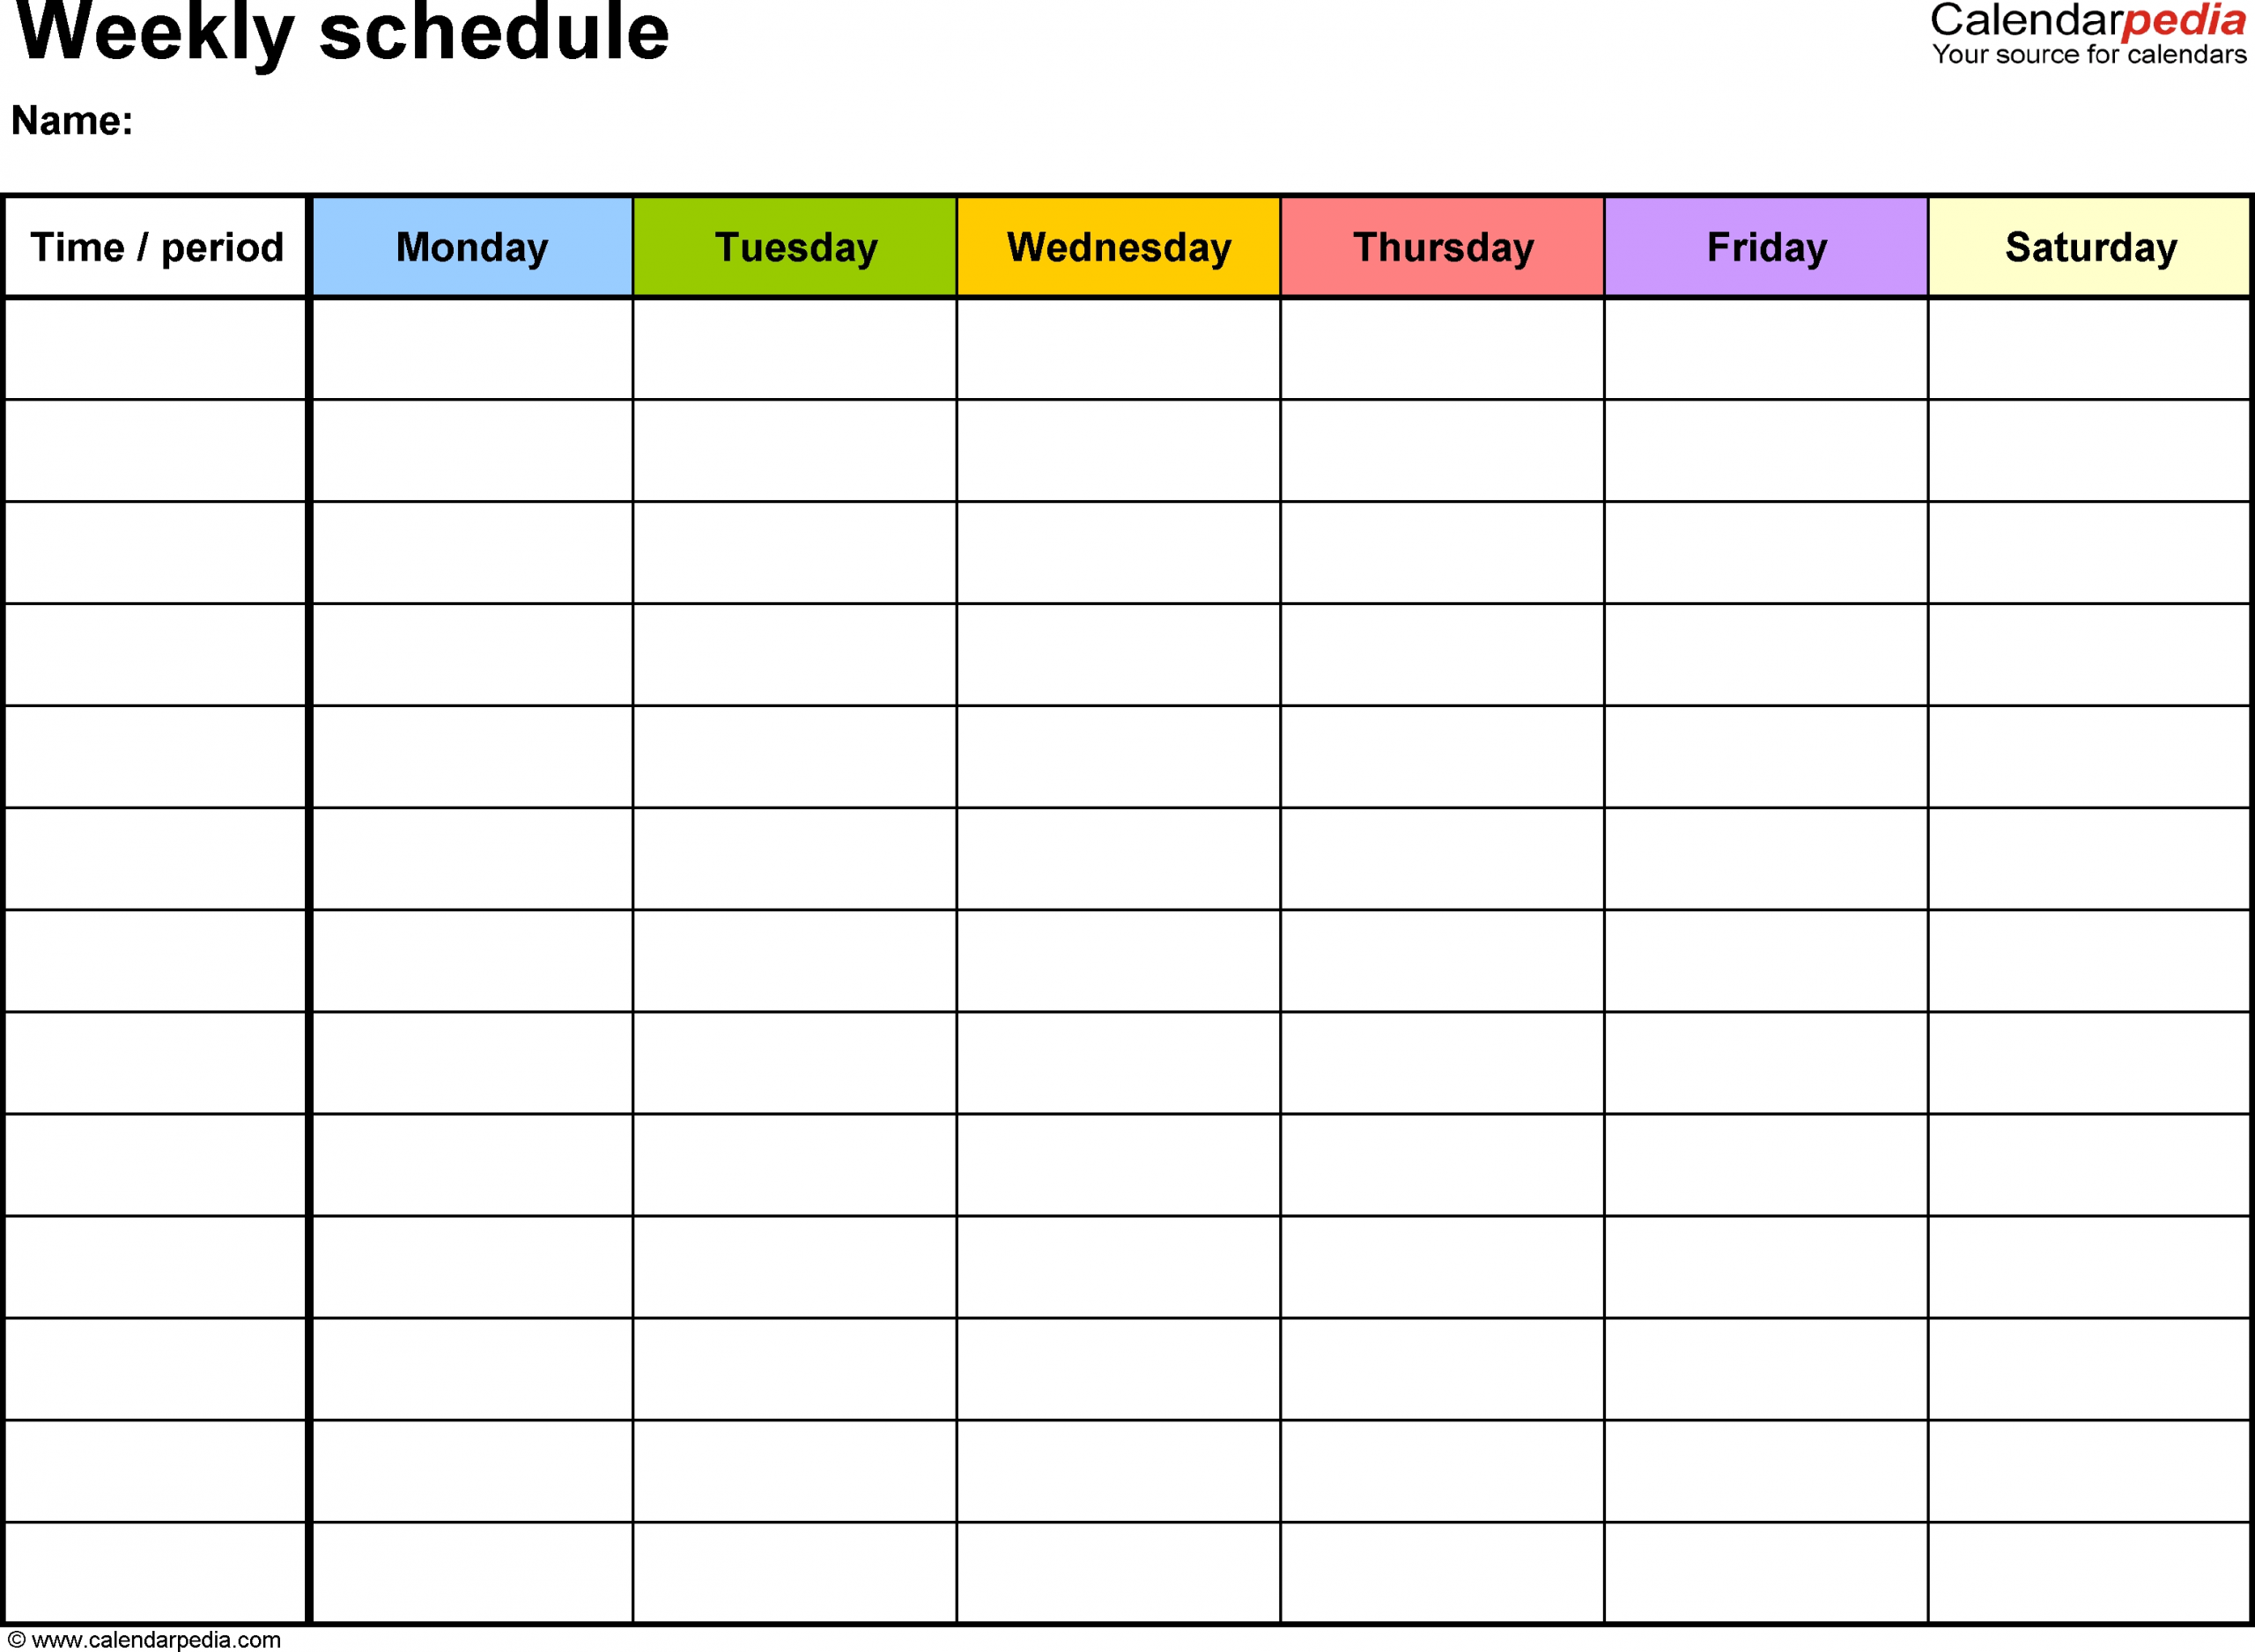 Free Weekly Schedule Templates For Word - 18 Templates within Weekly Calendar Template With Times